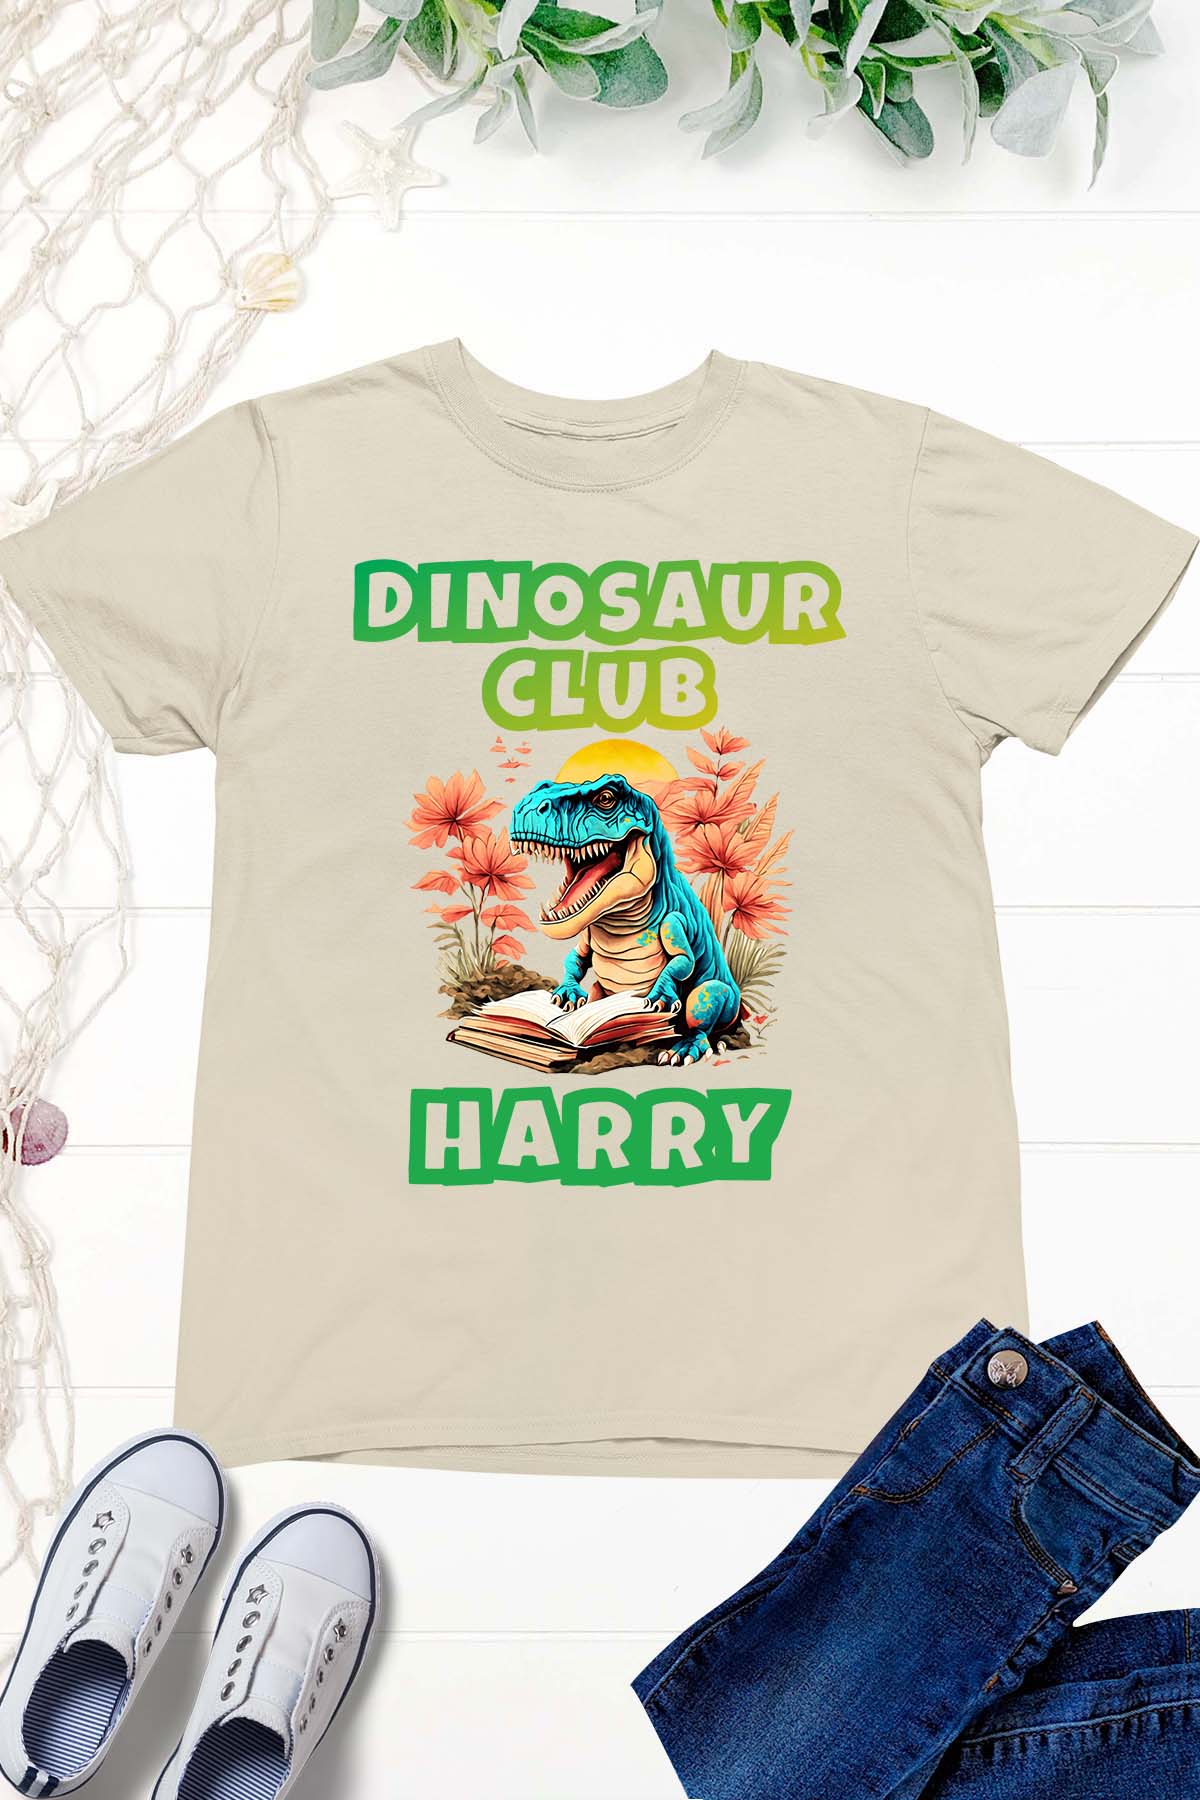 Personalise Kids Dinosaur Club World Book Day Shirts Funny School Party Tee